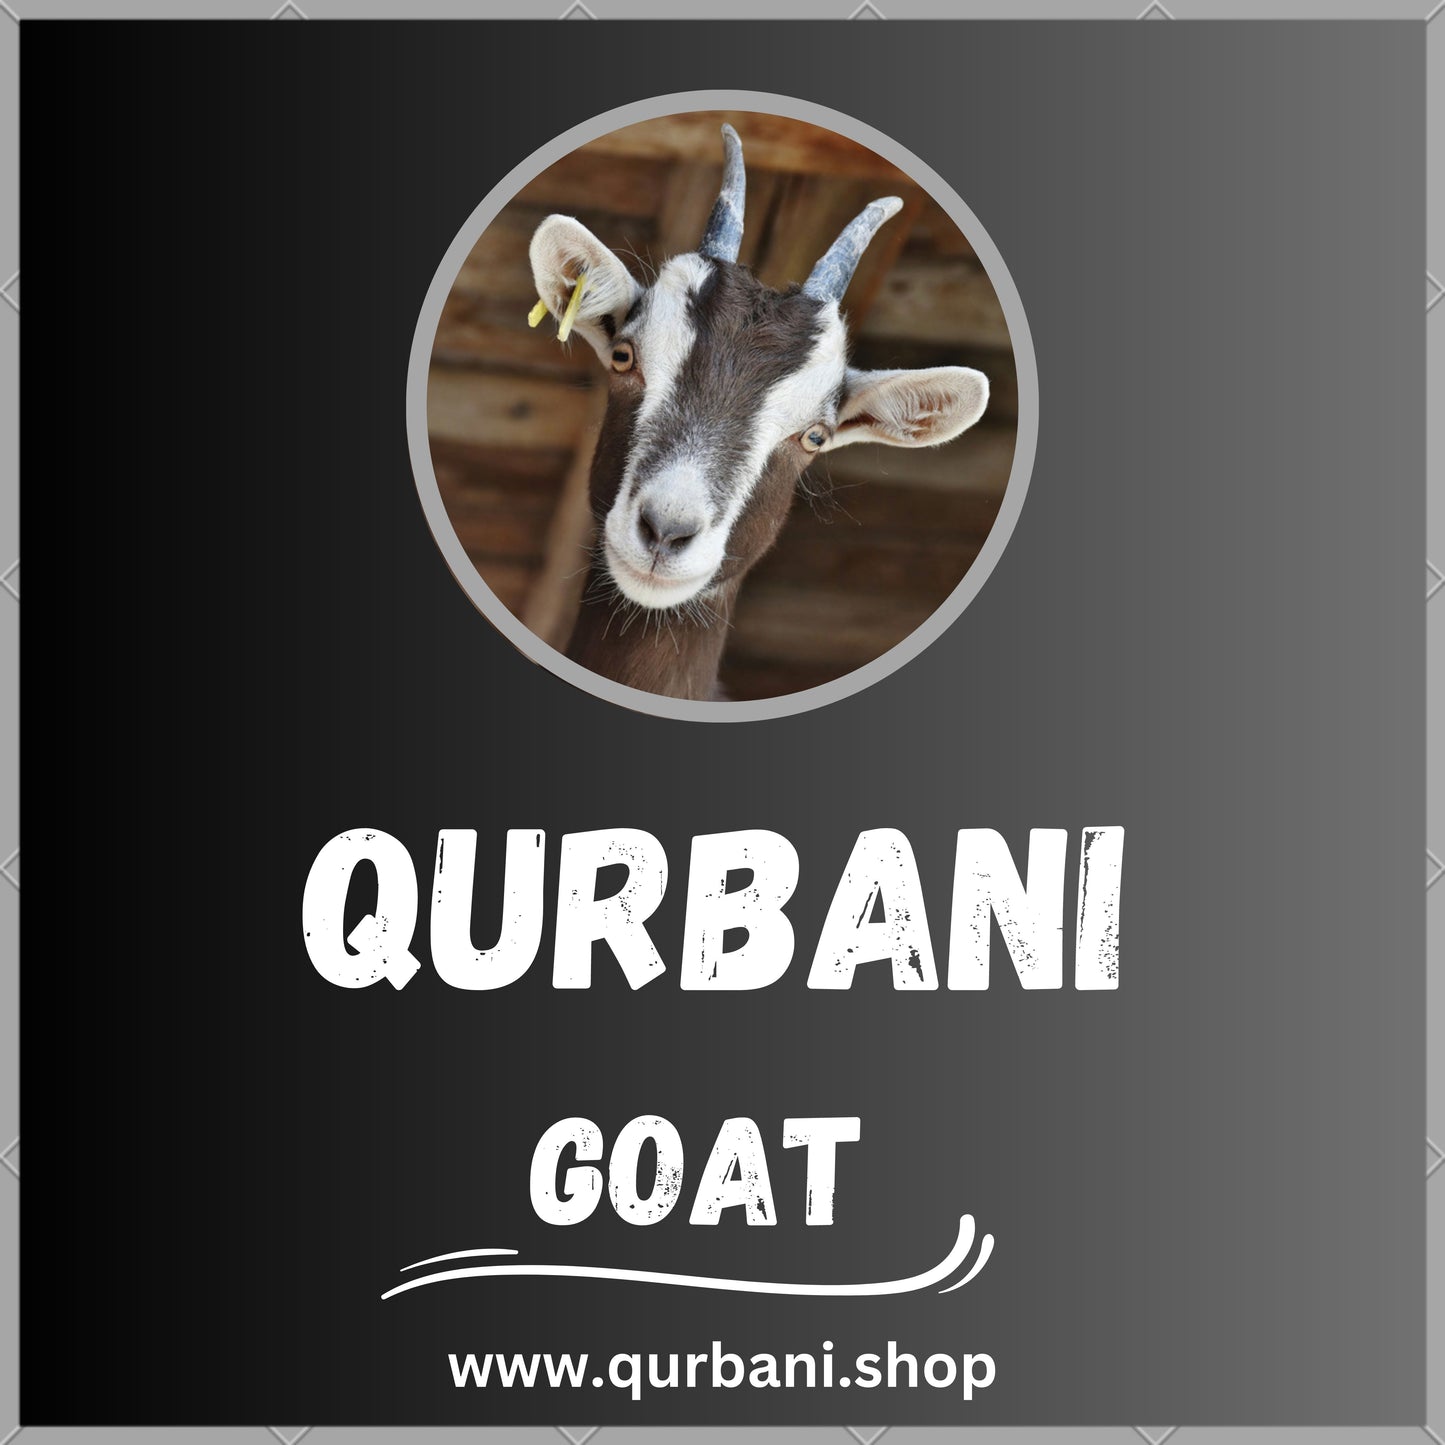 High-Quality Qurbani Services in Los Angeles - Order Now for Eid-ul-Adha!